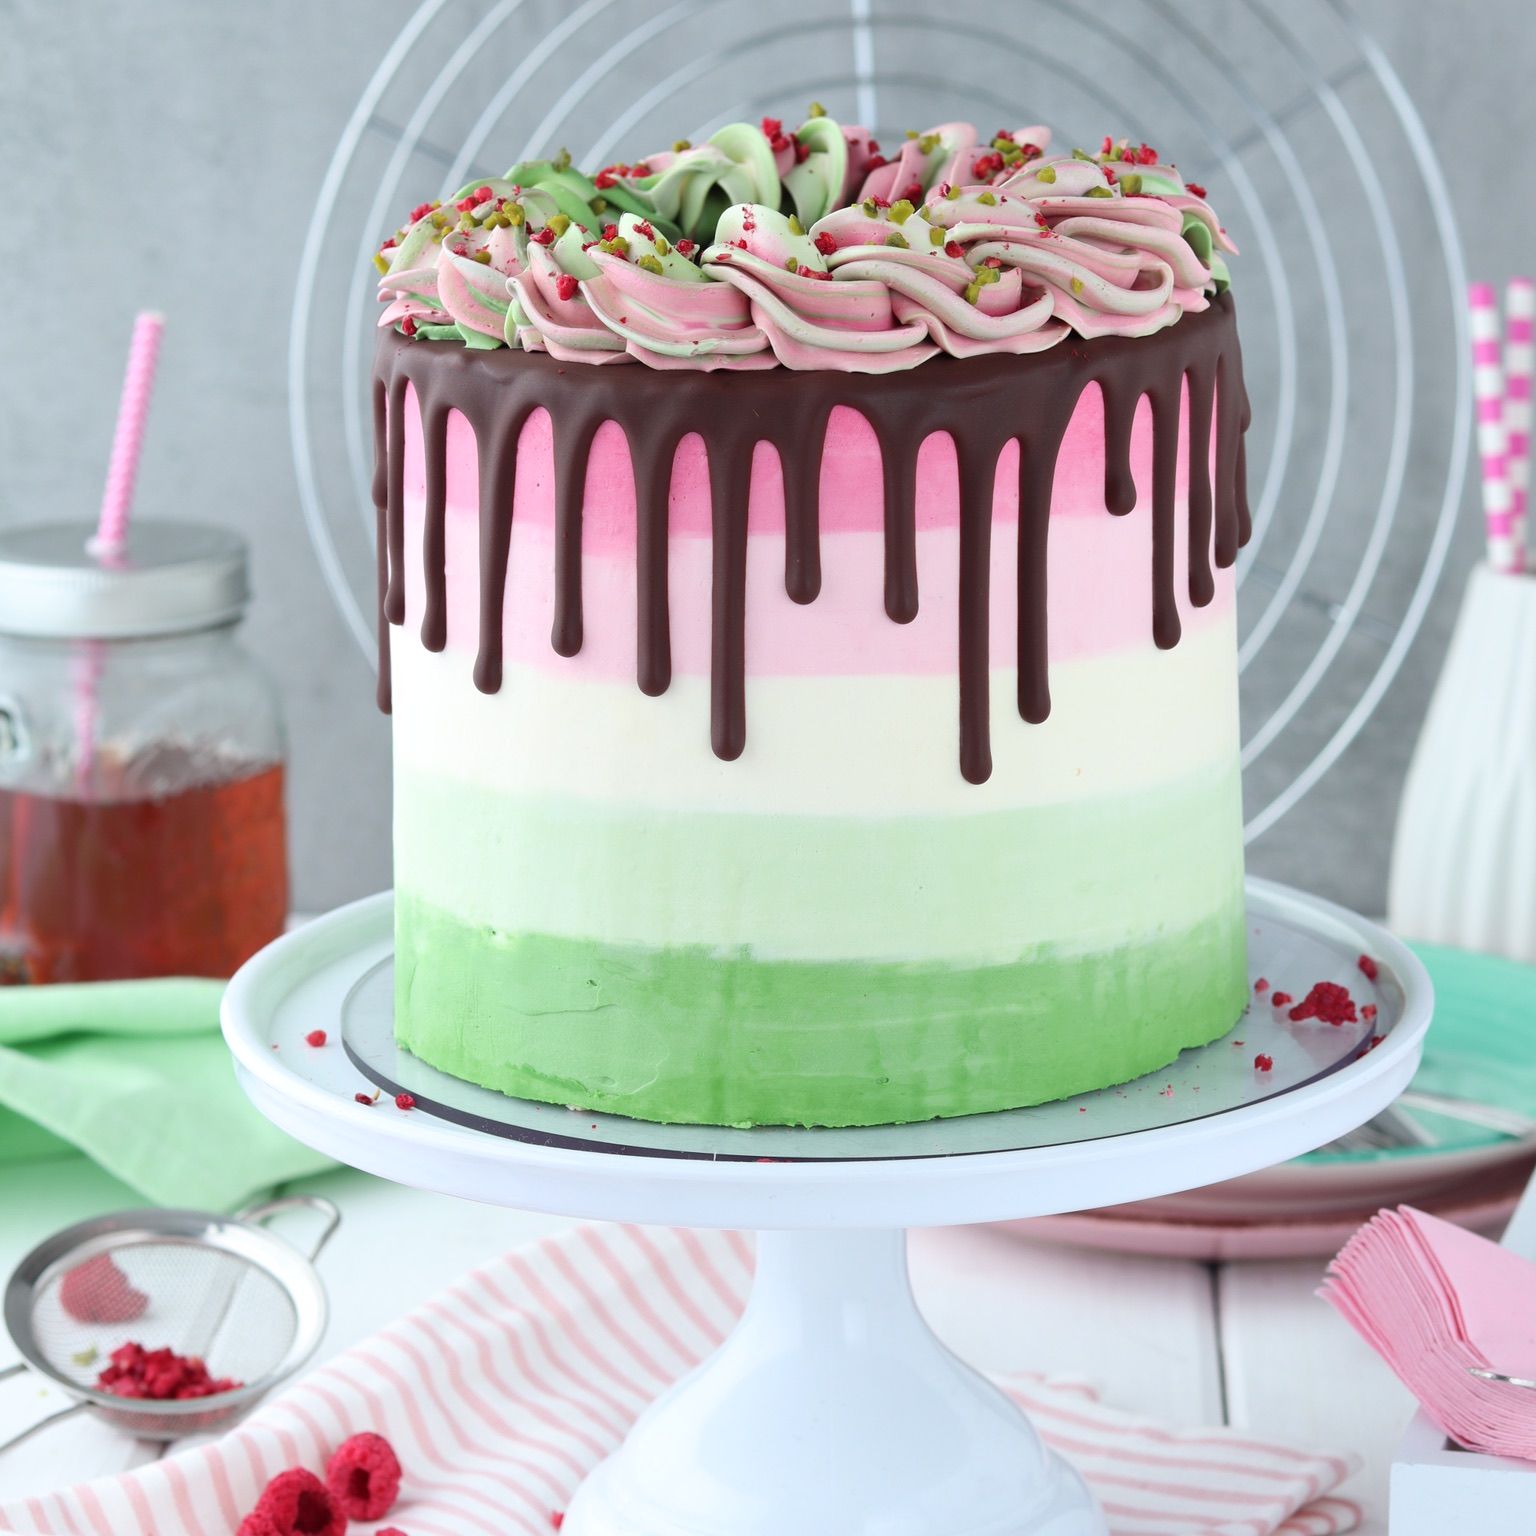 Ombre cake with raspberry and pistachio filling